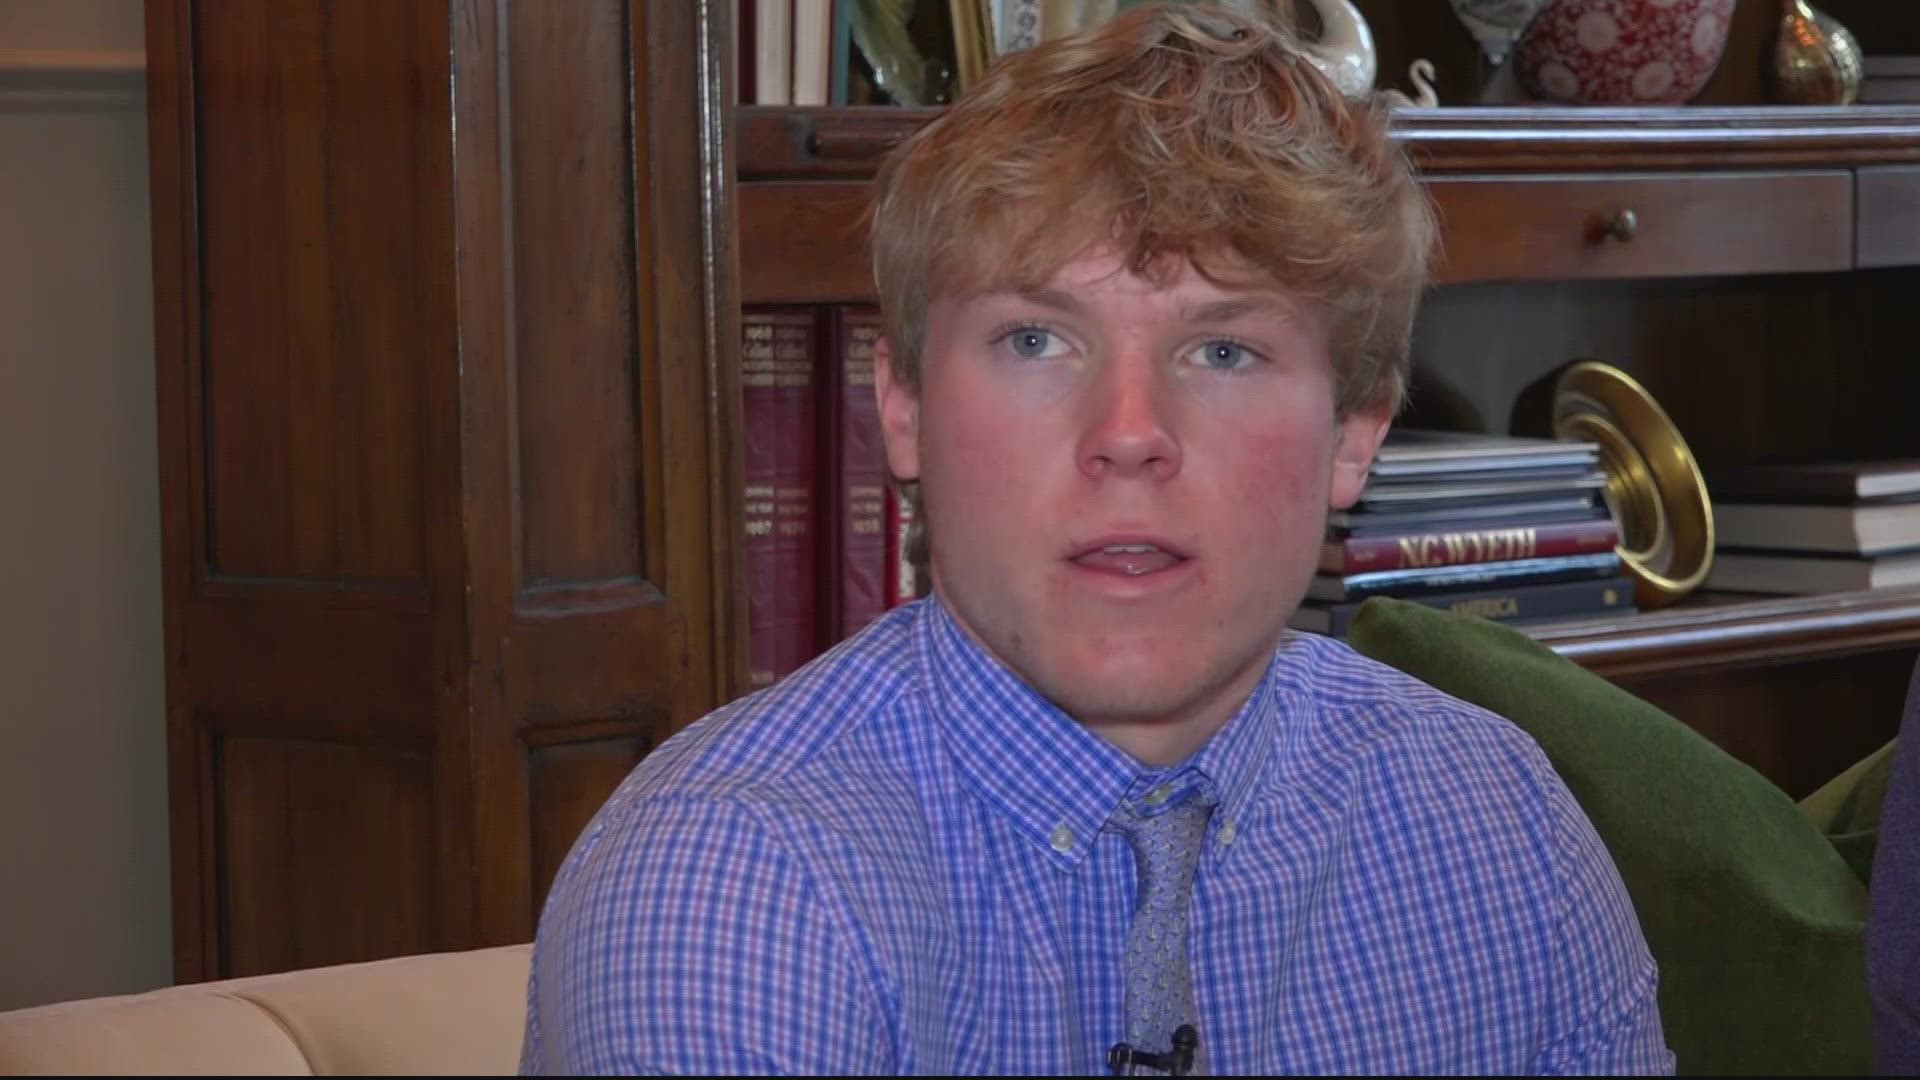 A high school lacrosse player in Maryland who survived a on-field cardiac incident says he's praying for Hamlin too.